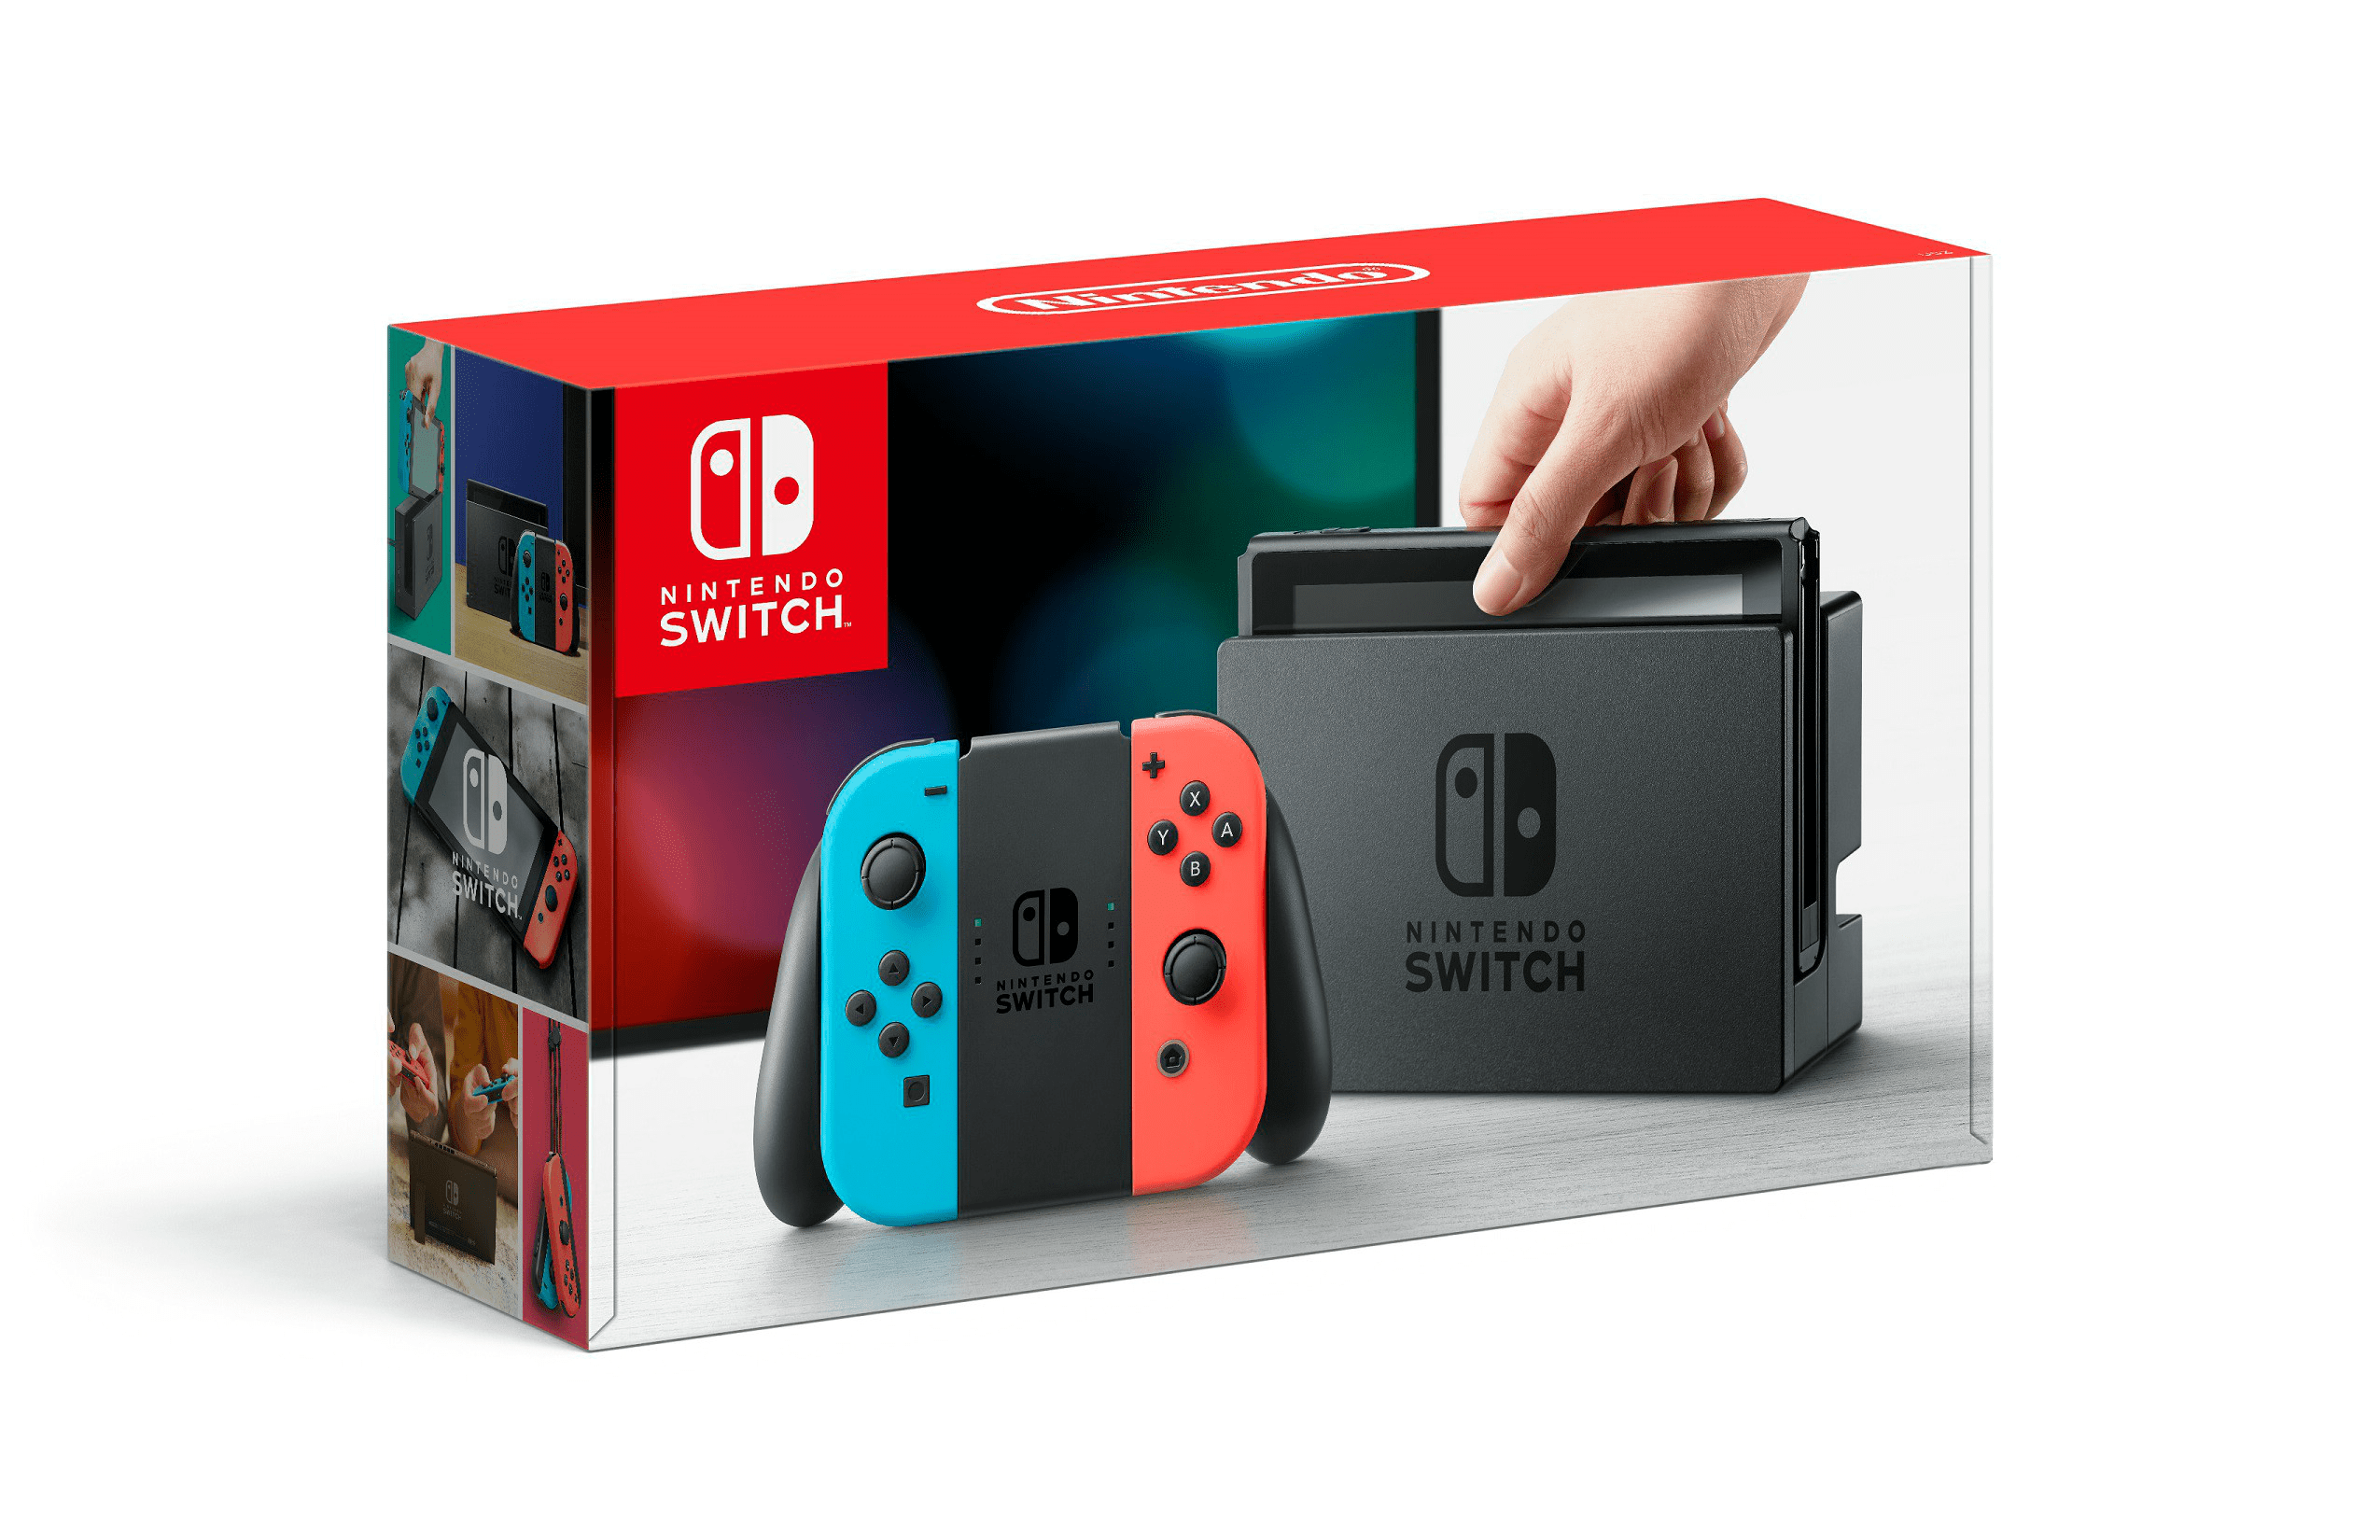 Everything we know about the Nintendo Switch and its March 3rd launch at $299.99